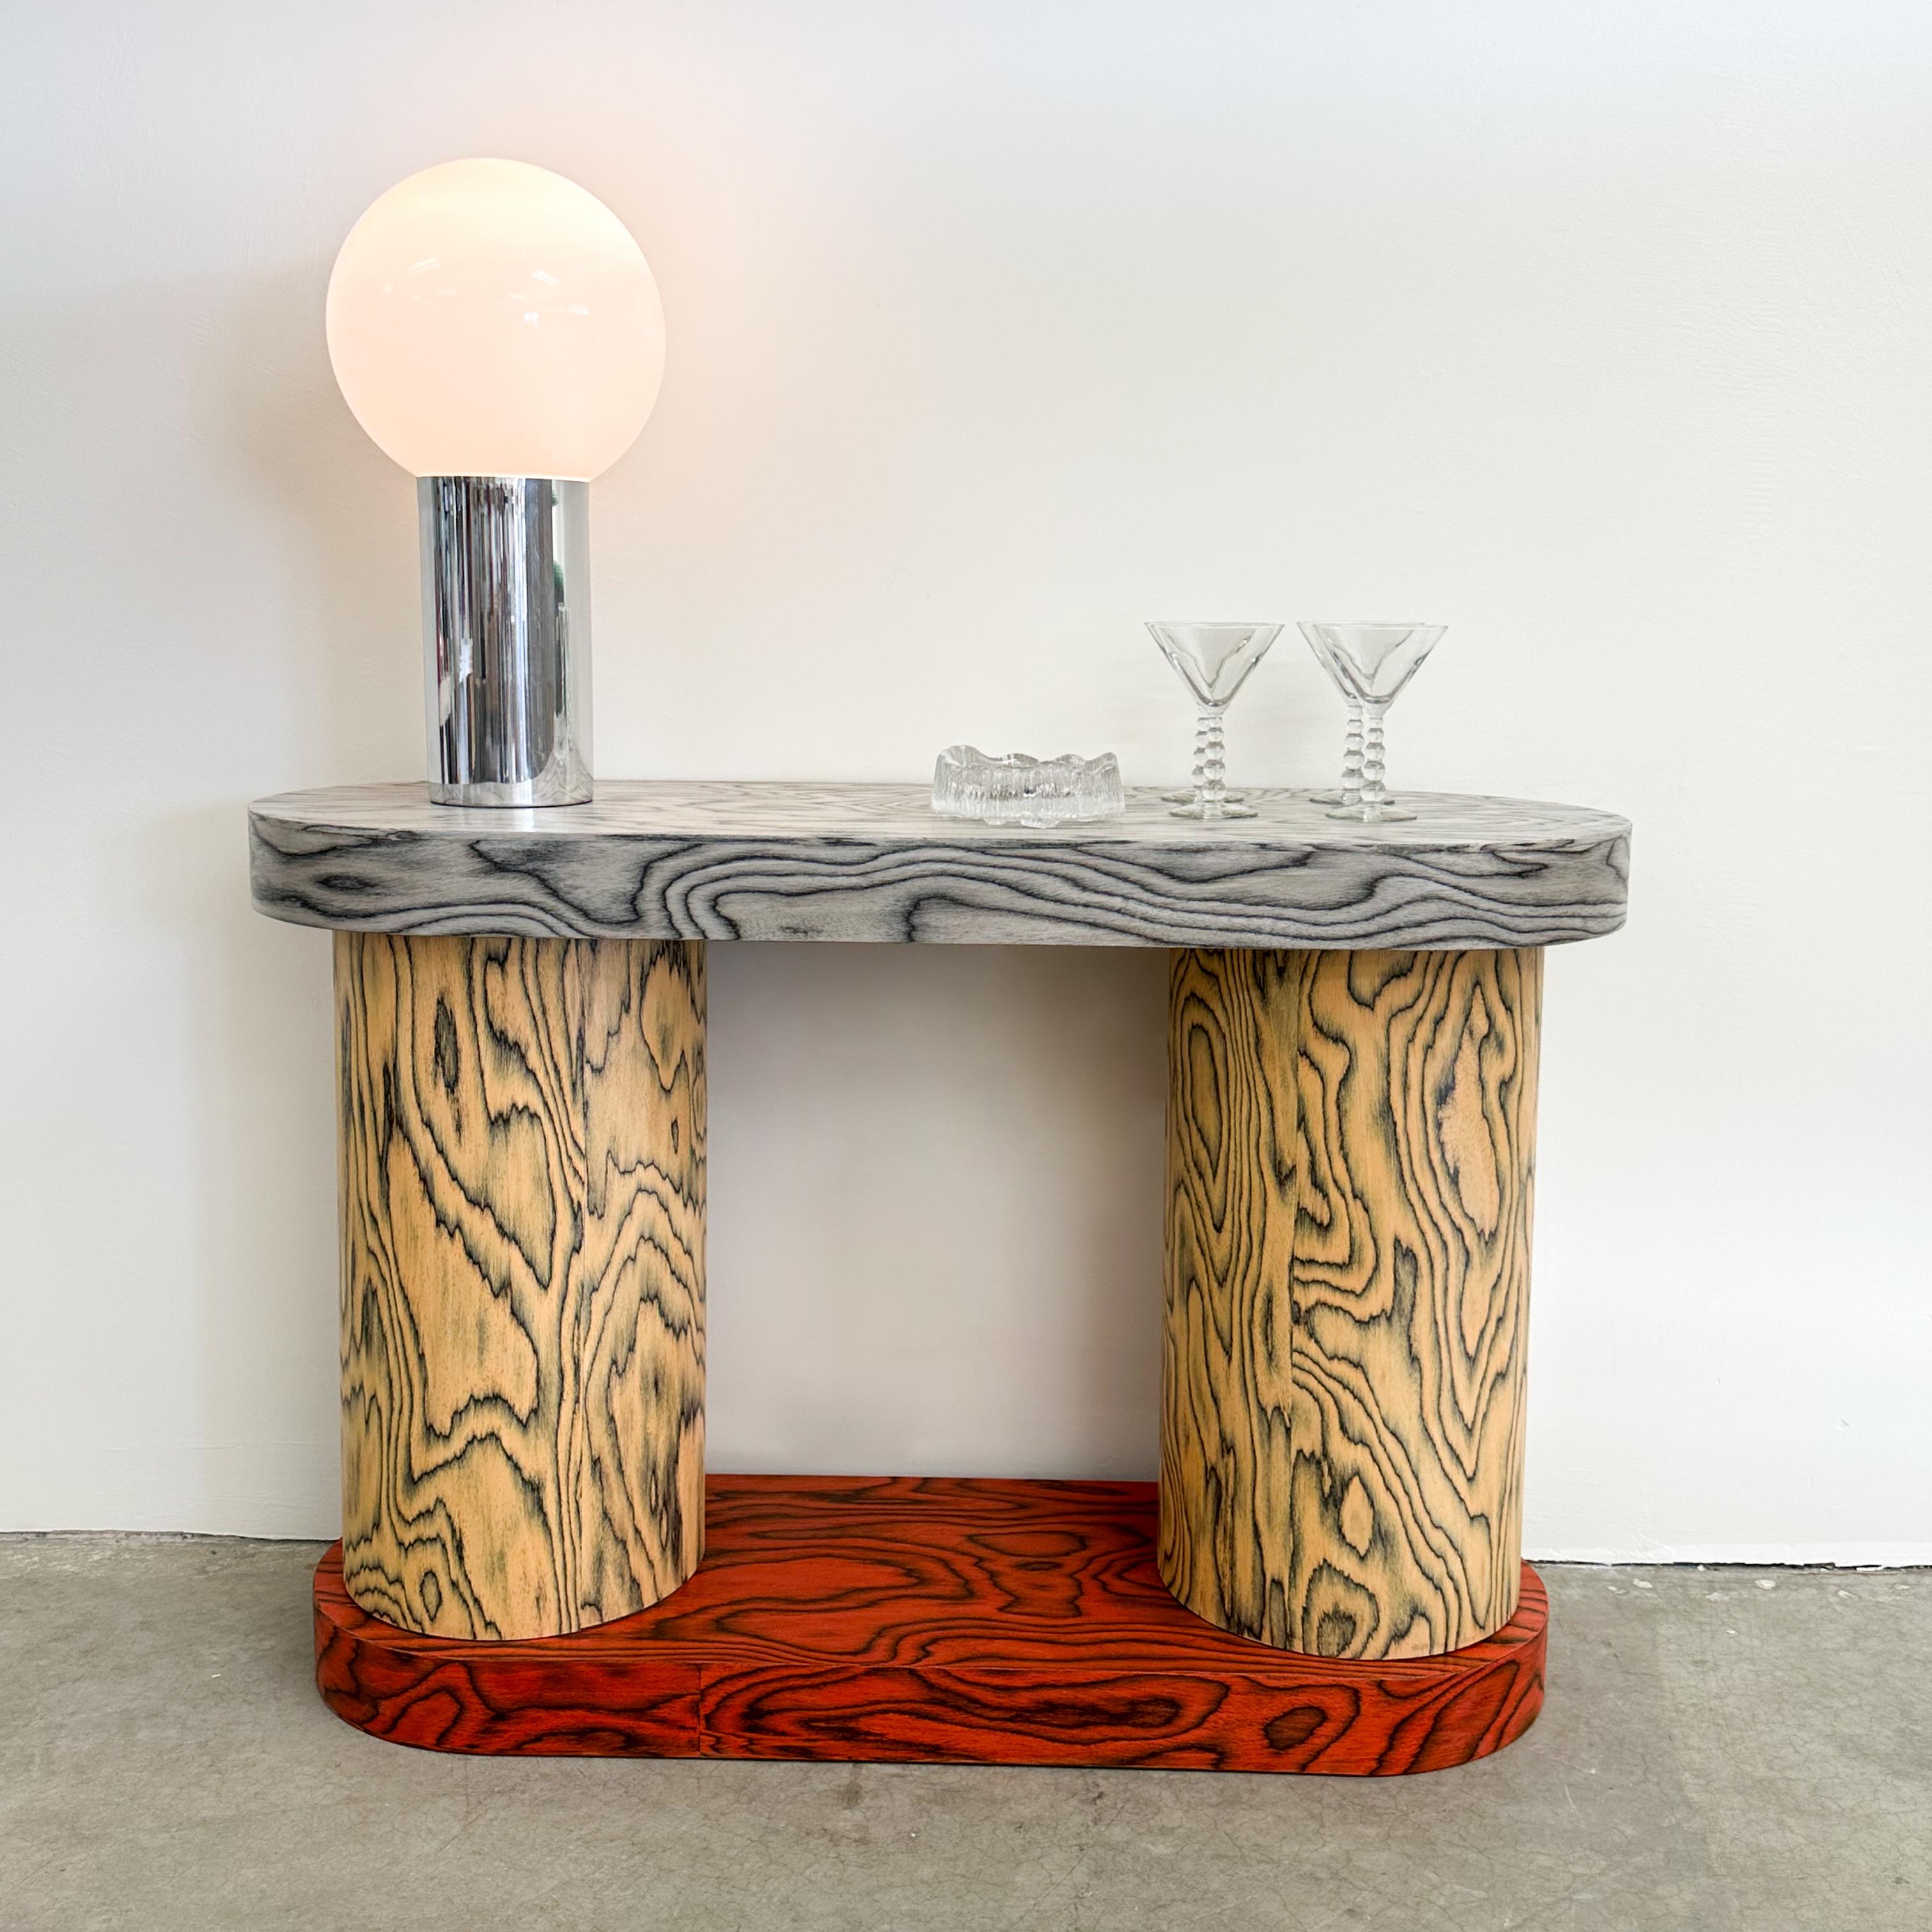 Vintage Postmodern Dry Bar/Console/DJ Table.

Showcasing an exclusive Ettore Sottsass Veneer design. This multifunctional piece can serve as a dry bar, console, or DJ table. Meticulously re-veneered with the original Ettore Sottsass pattern from